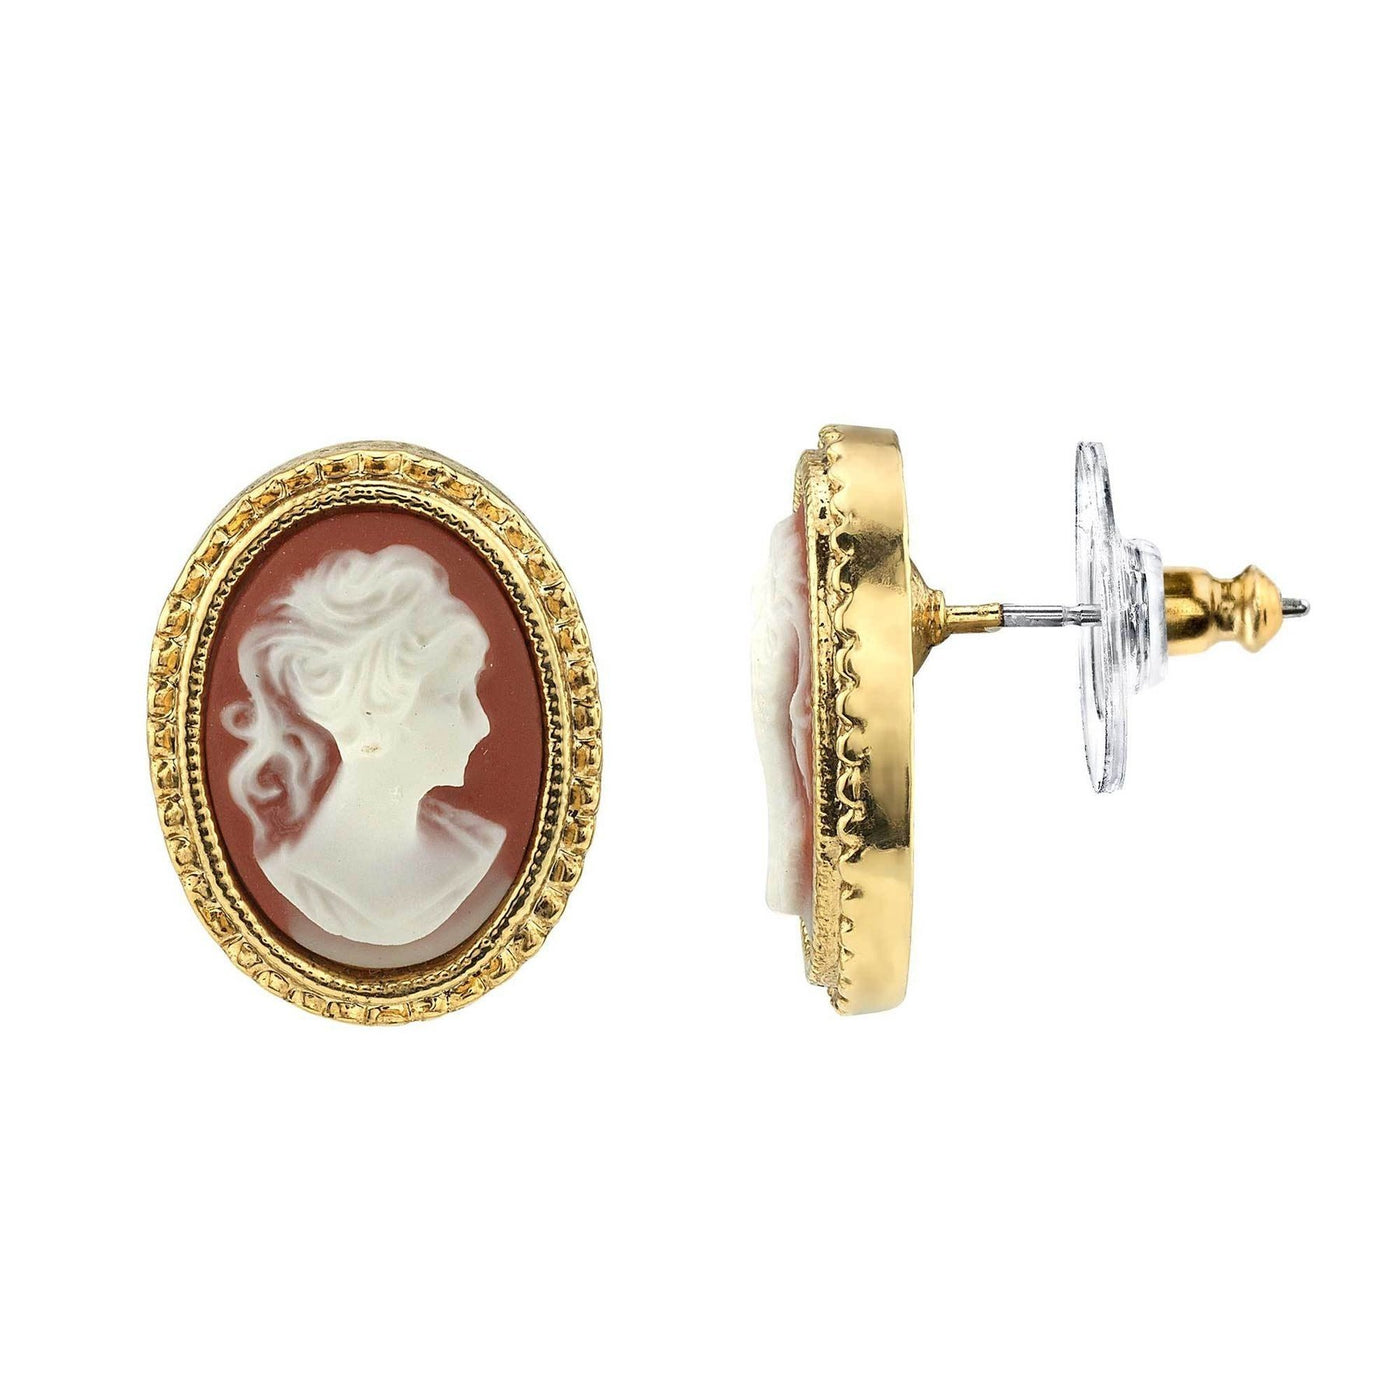 Downton Abbey Gold-Dipped Faux Cameo Stud Earrings